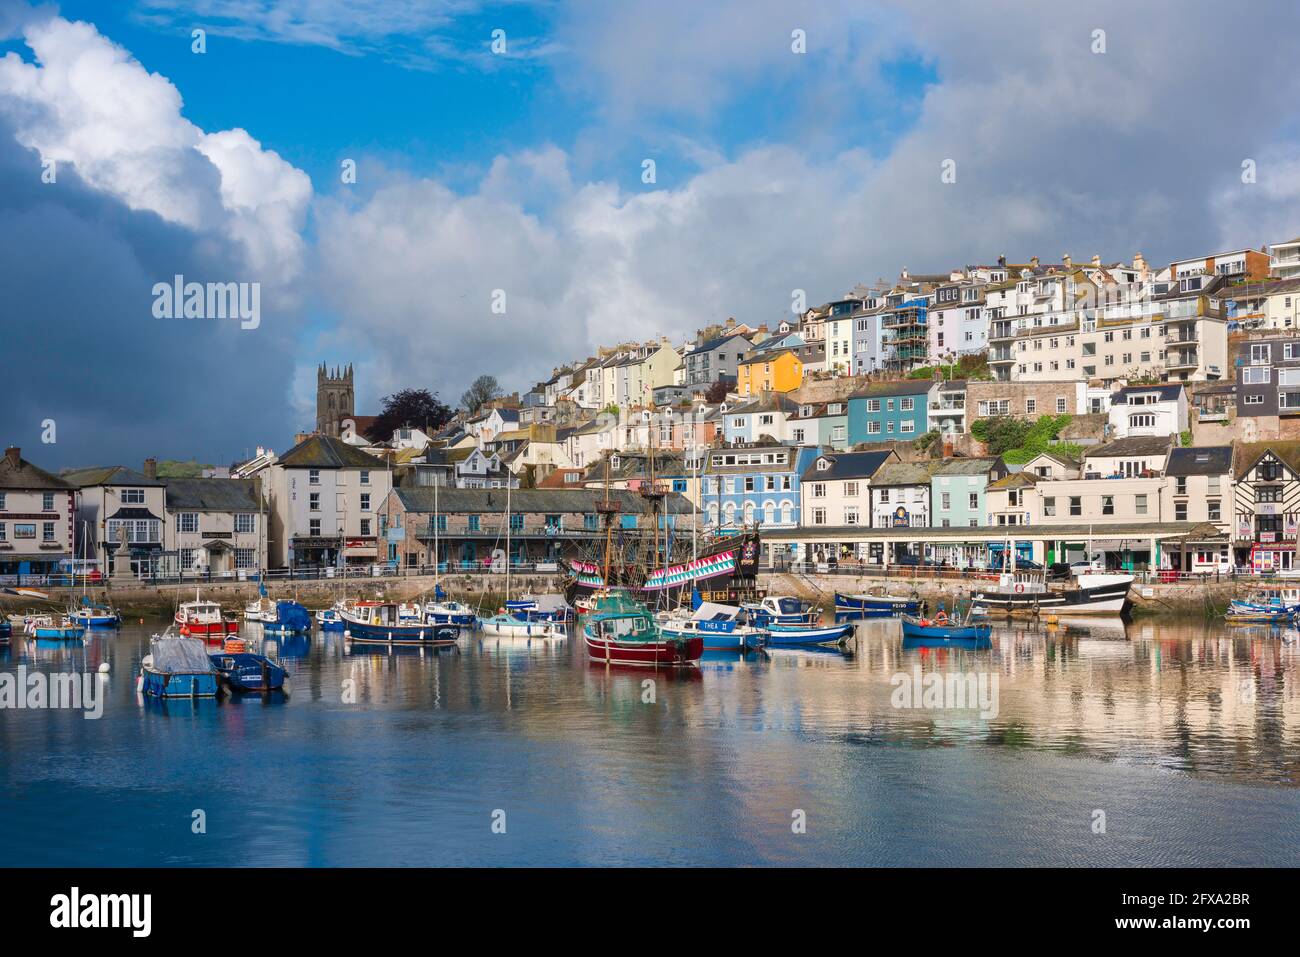 Torbay Devon UK, view of fishing boats moored in the colourful harbour at Brixham, Torbay, Devon, south west England, UK Stock Photo